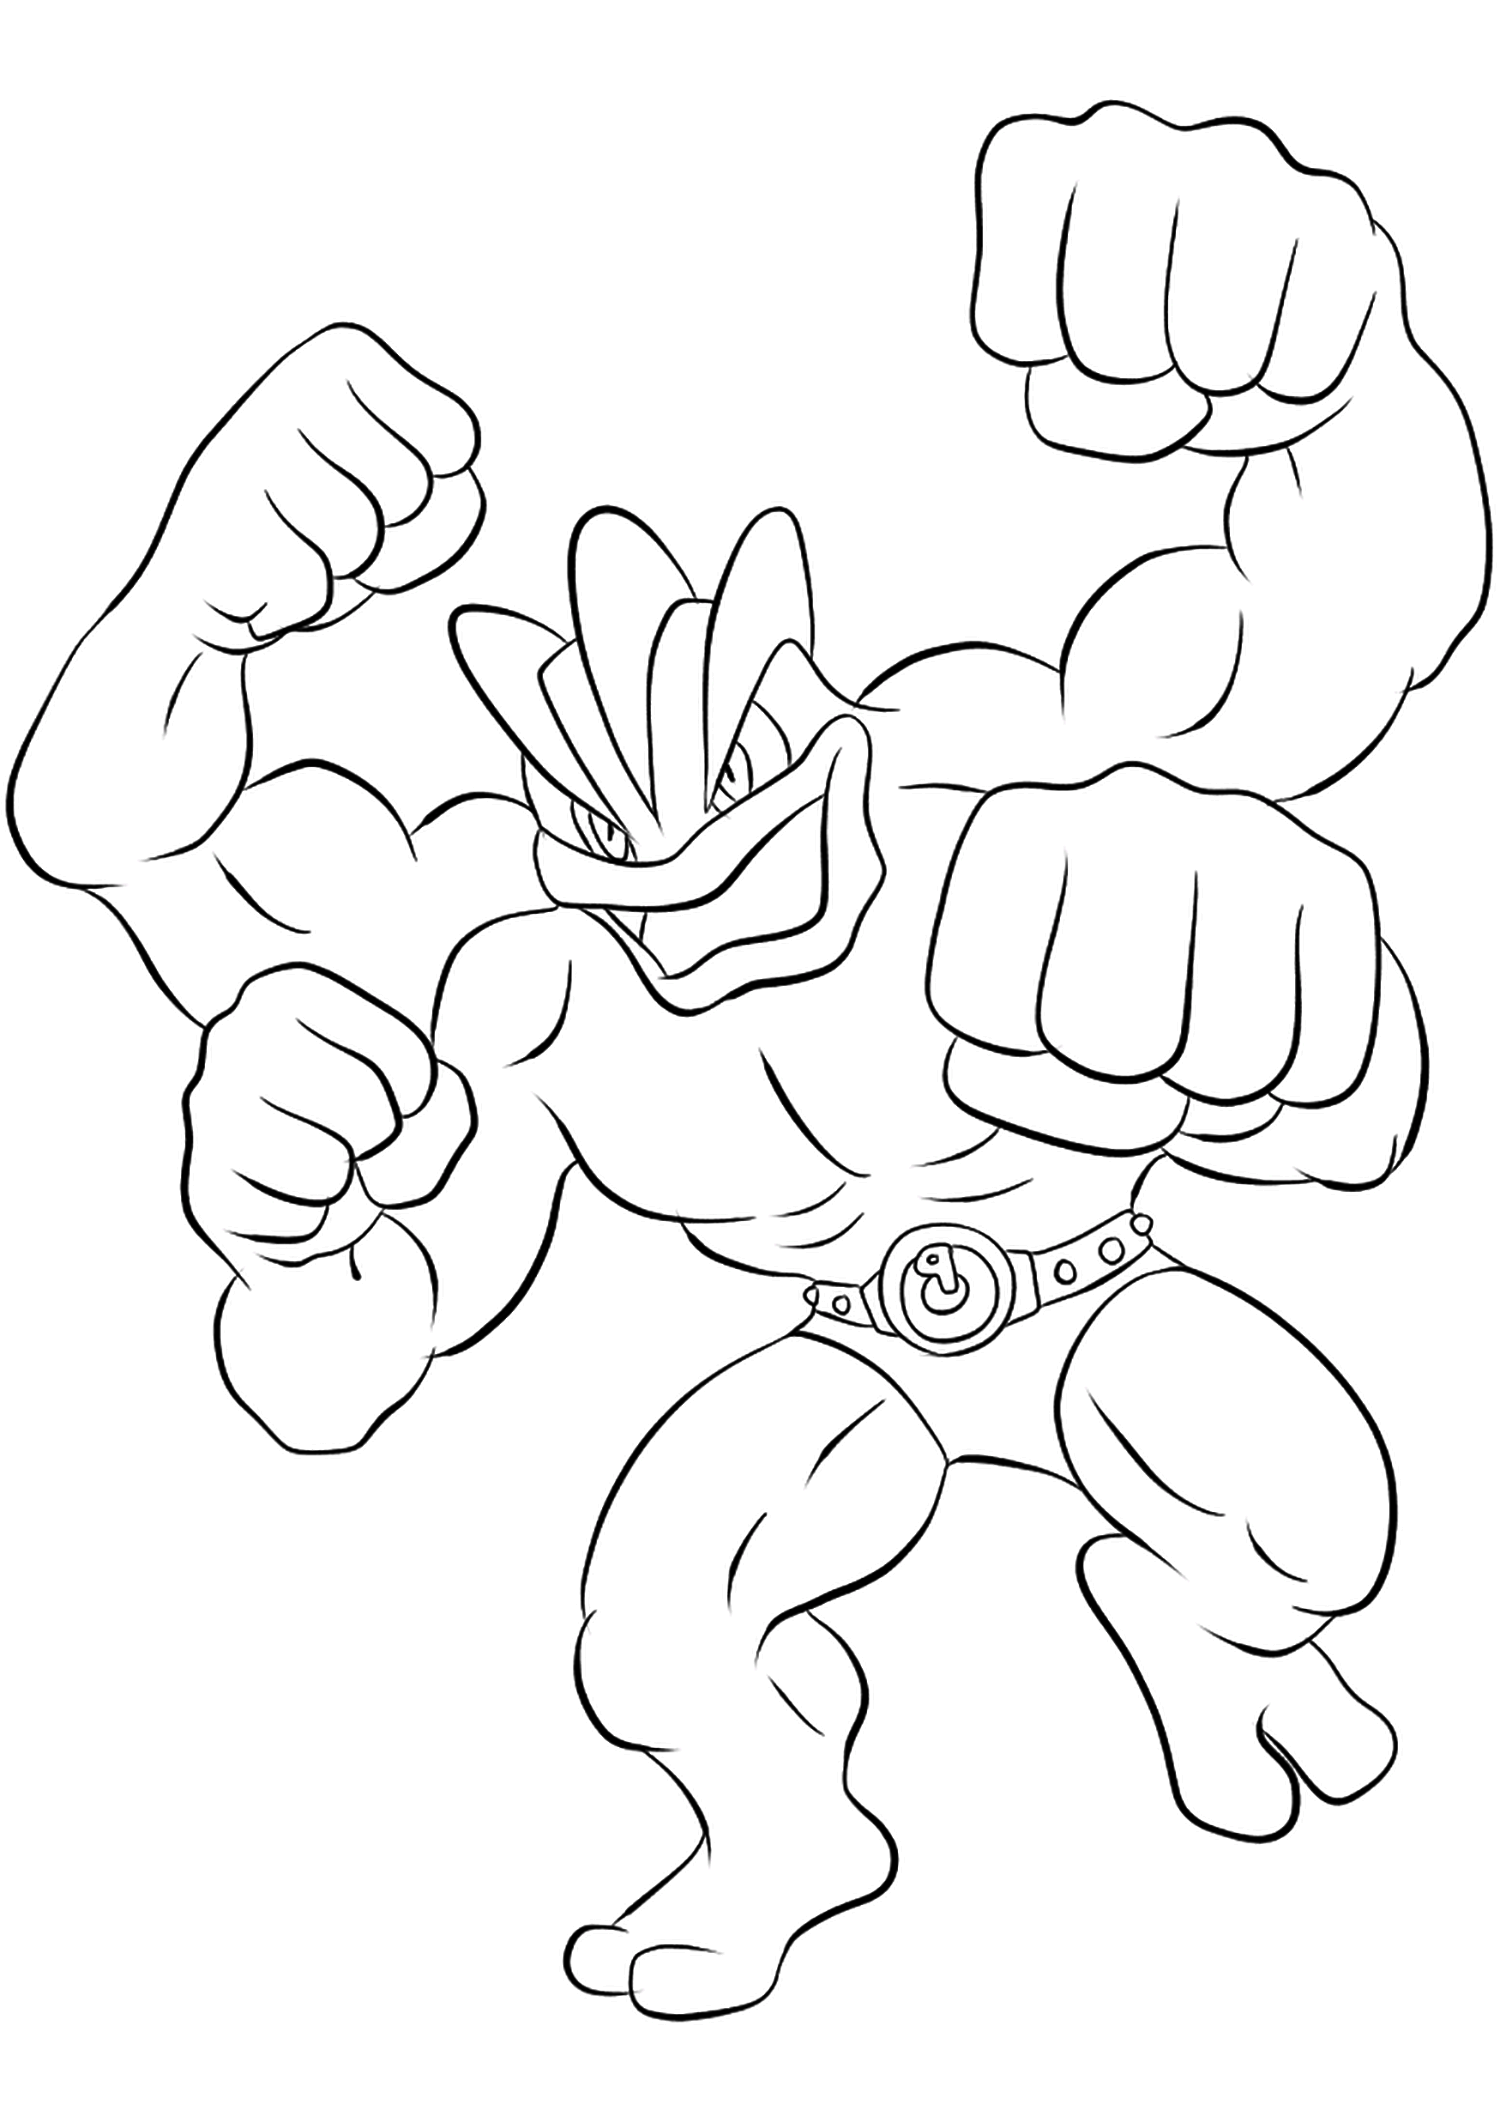 Machamp (No.68). Machamp Coloring page, Generation I Pokemon of type FightingOriginal image credit: Pokemon linearts by Lilly Gerbil on Deviantart.Permission:  All rights reserved © Pokemon company and Ken Sugimori.